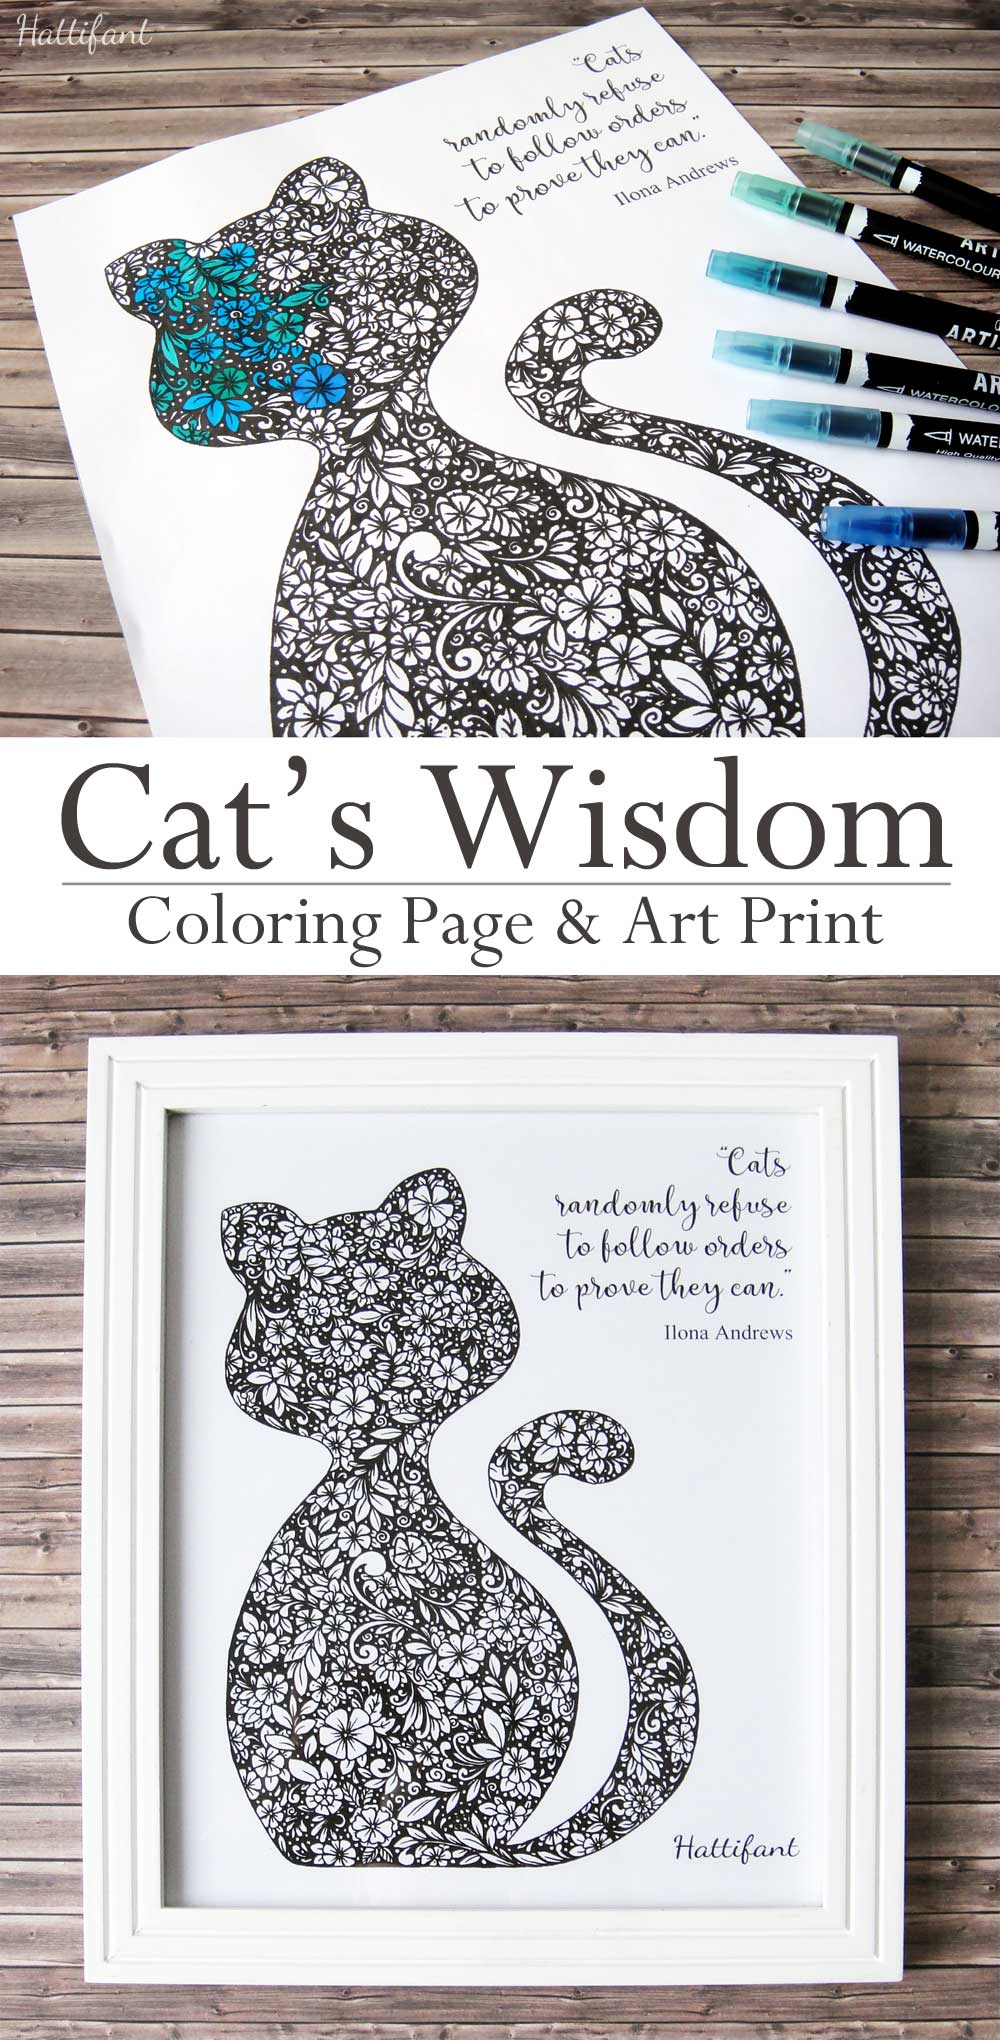 Hattifant Cat Wisdom Coloring Page and Art Print